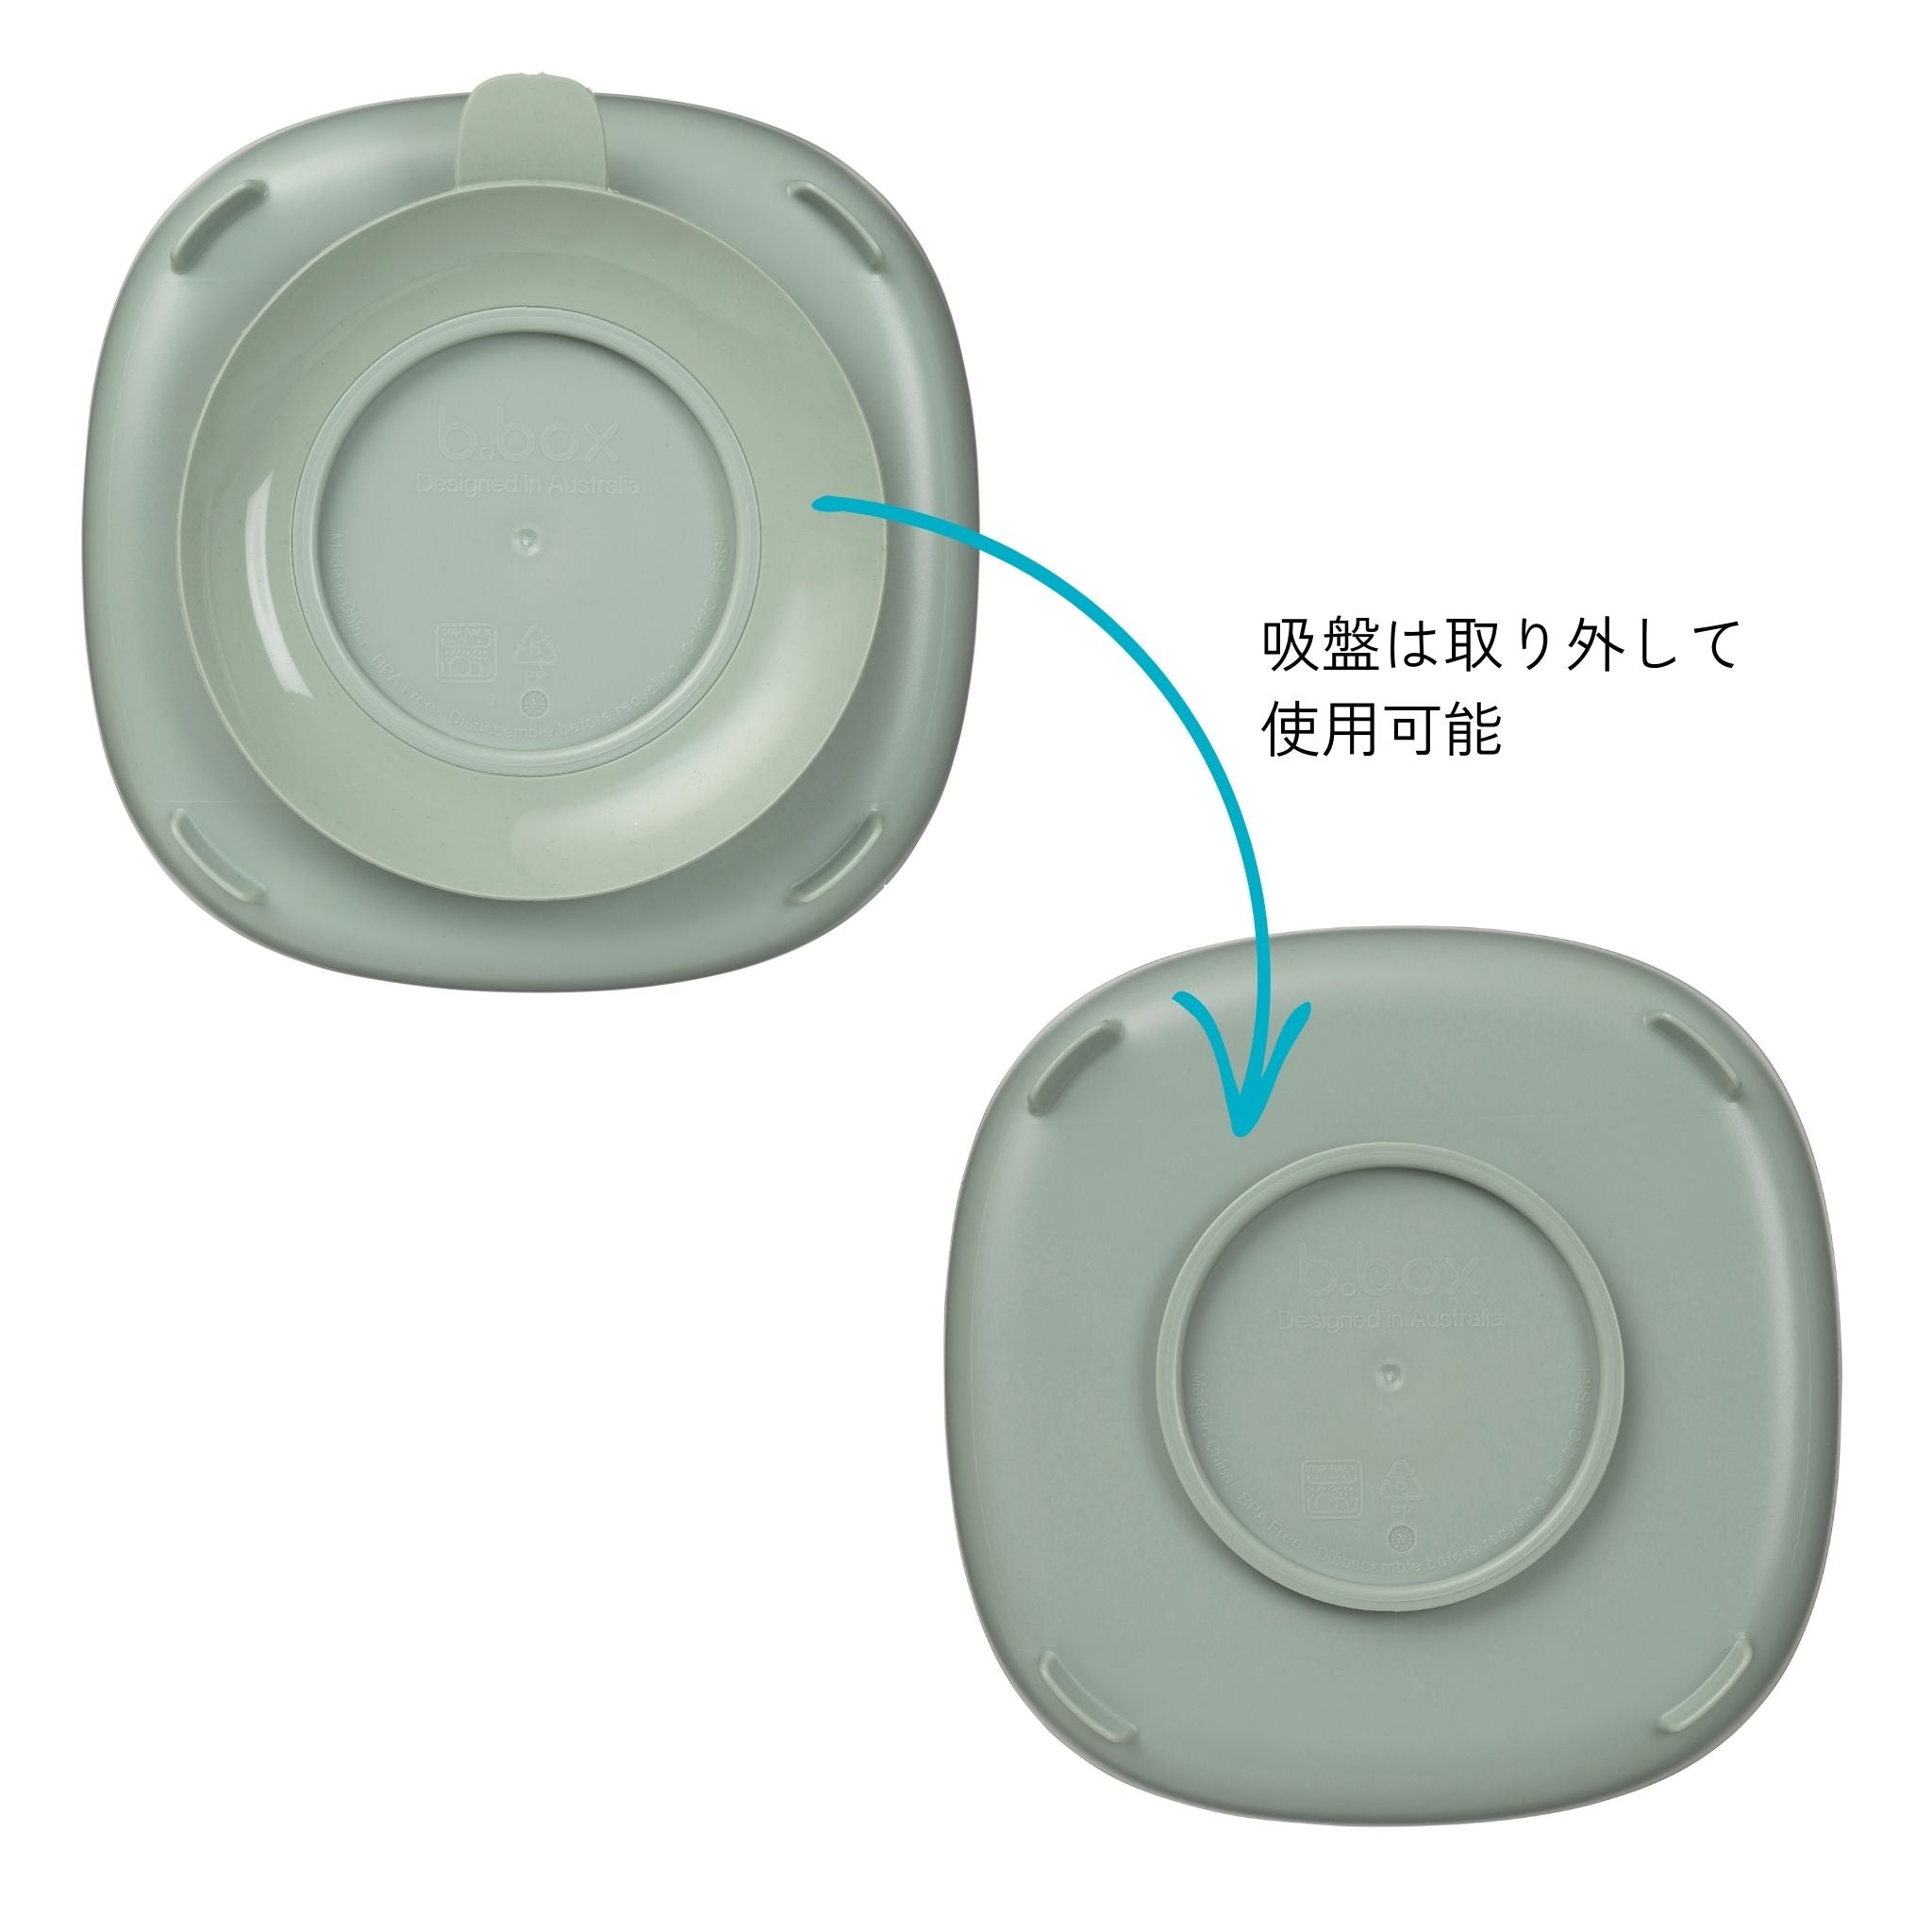 2 in 1 suction plate sage